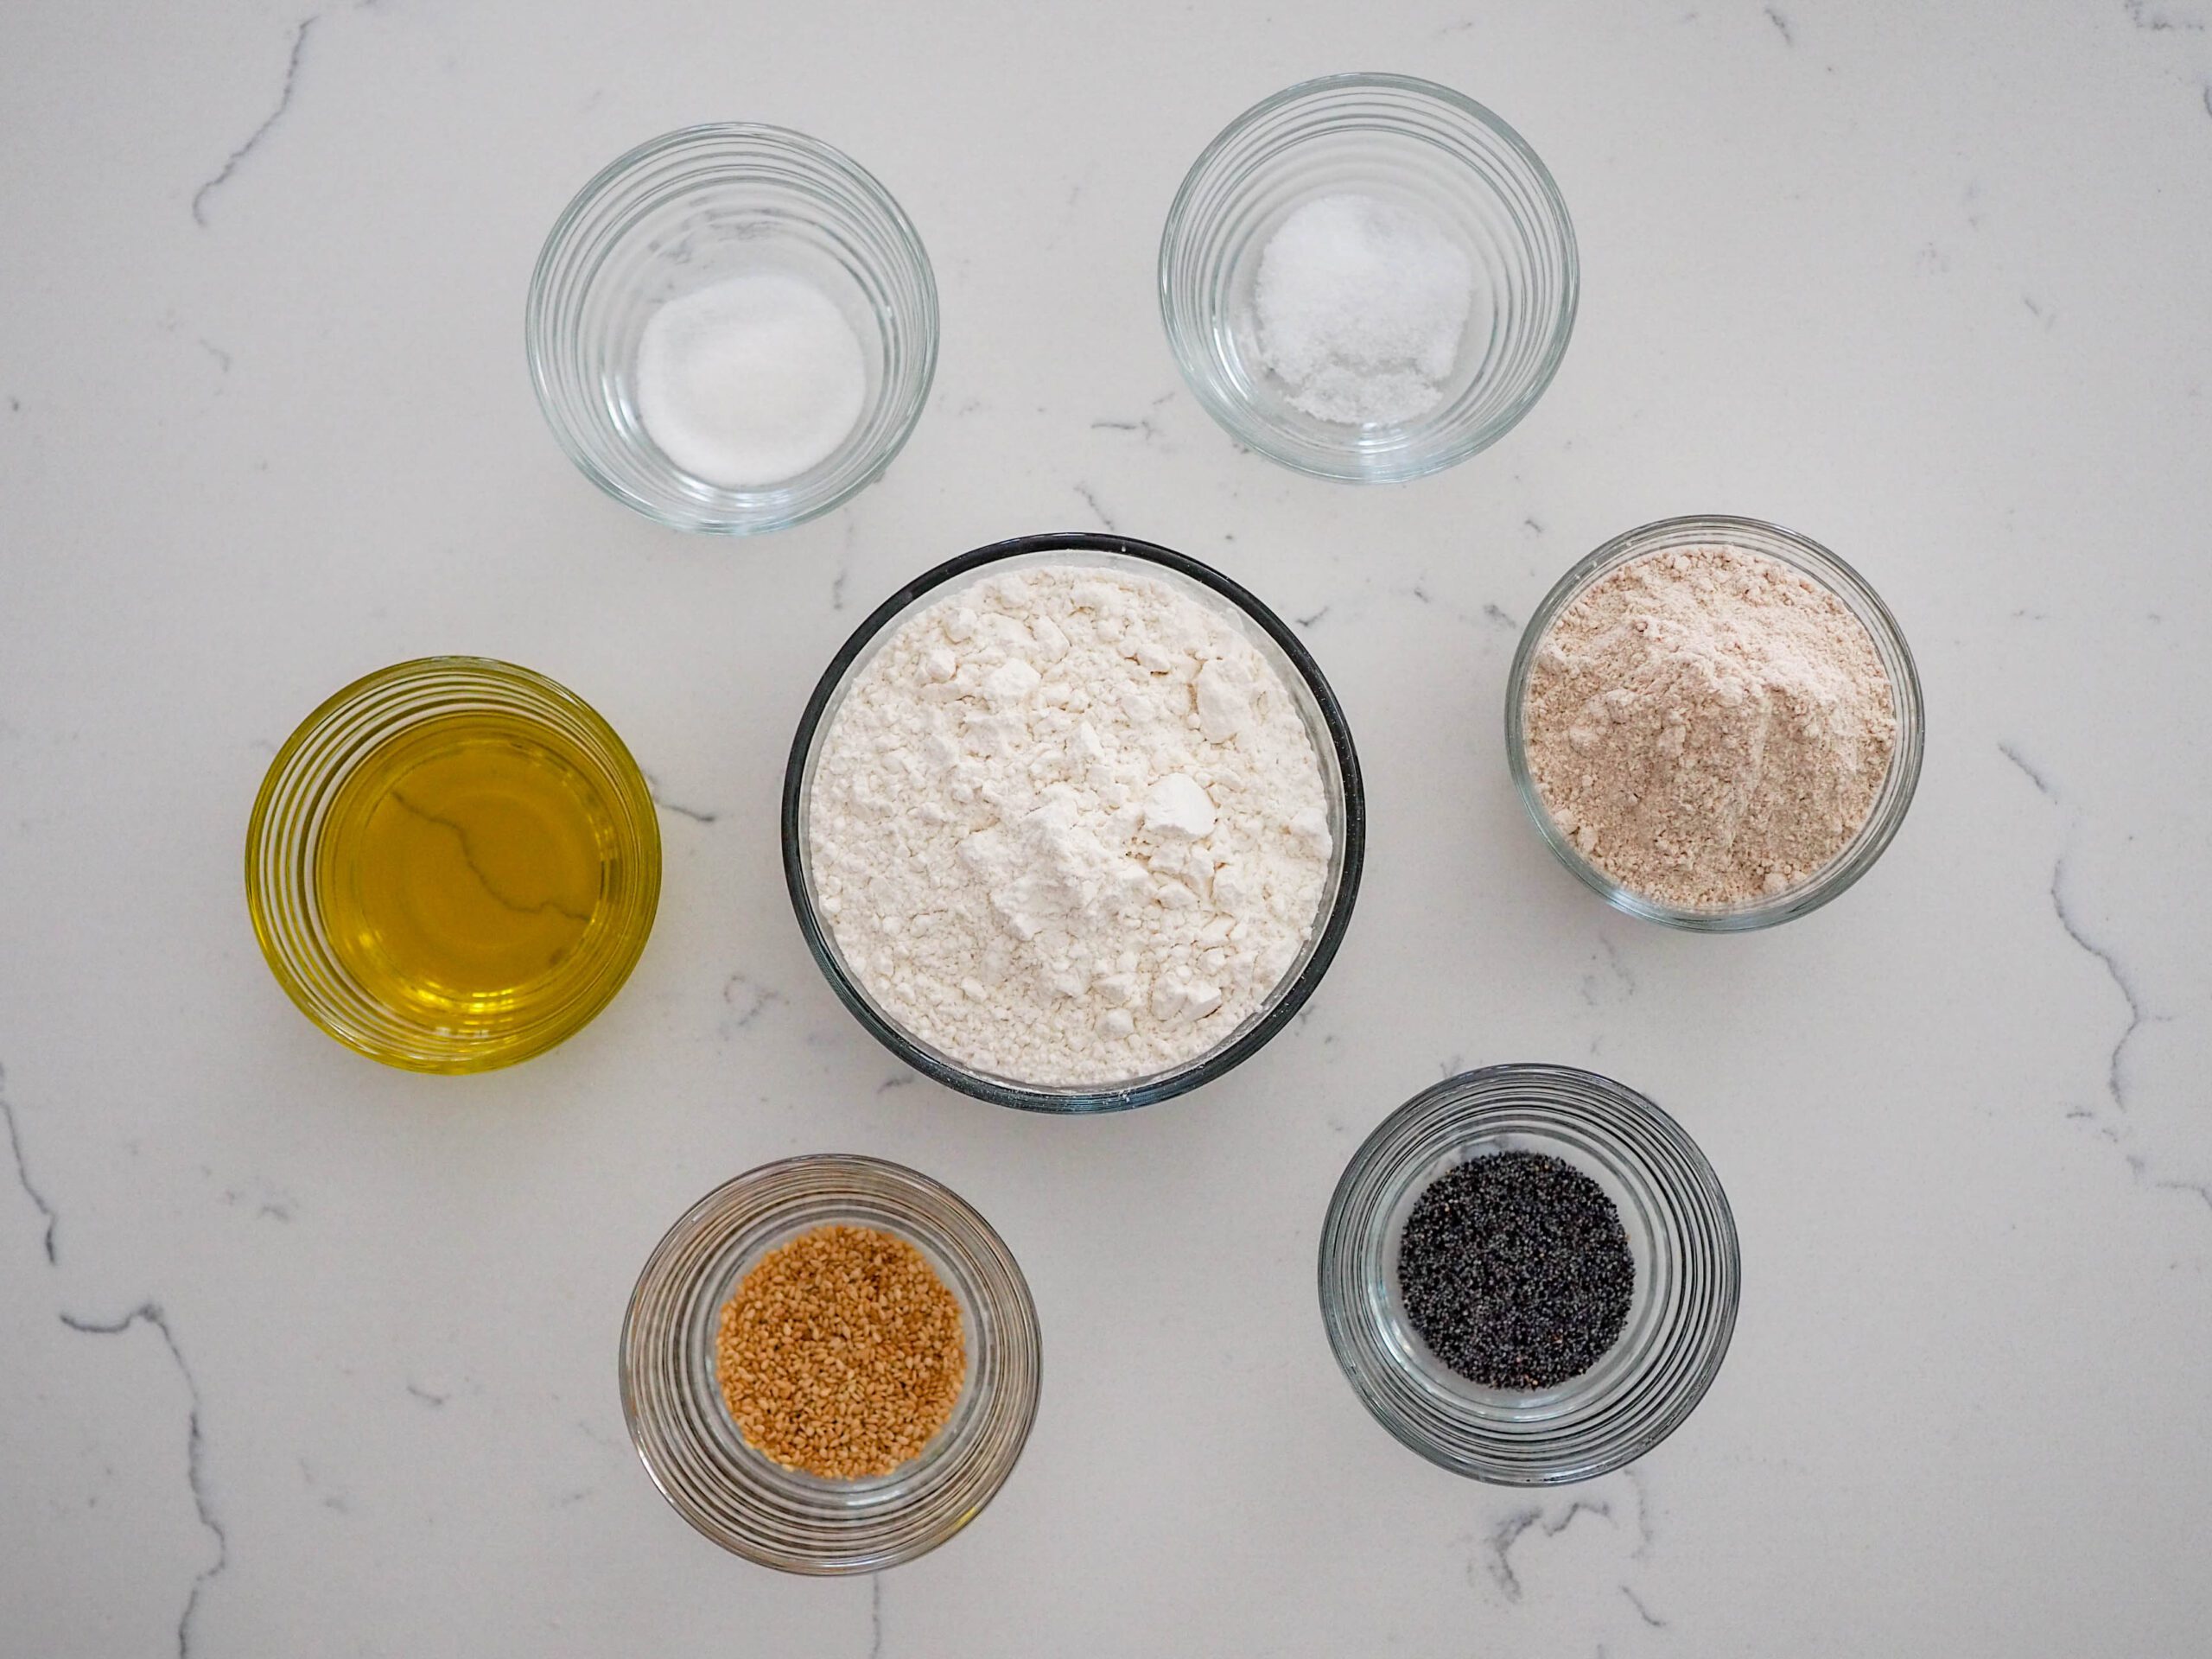 Ingredients for sesame and poppy seed crackers: olive oil, sugar, salt, whole wheat flour, poppy seeds, sesame seeds, and flour.